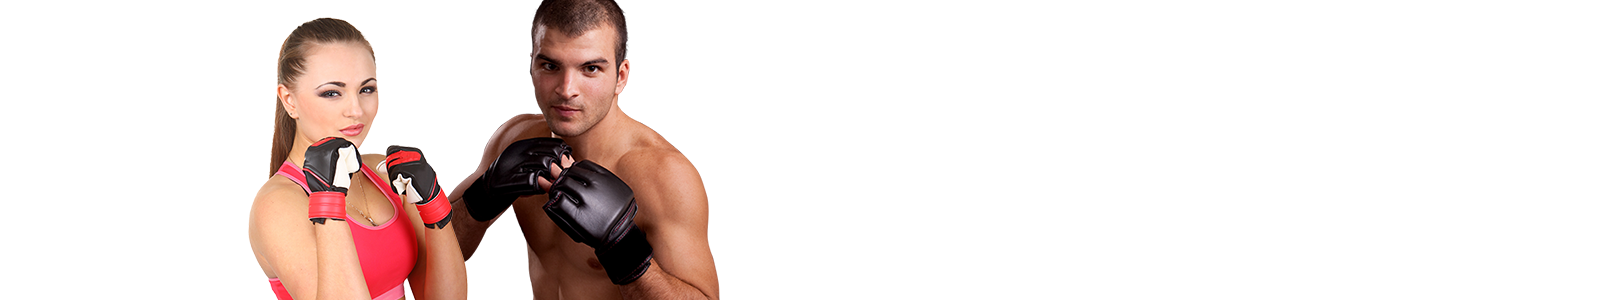 banner-after-fitness-kickboxing